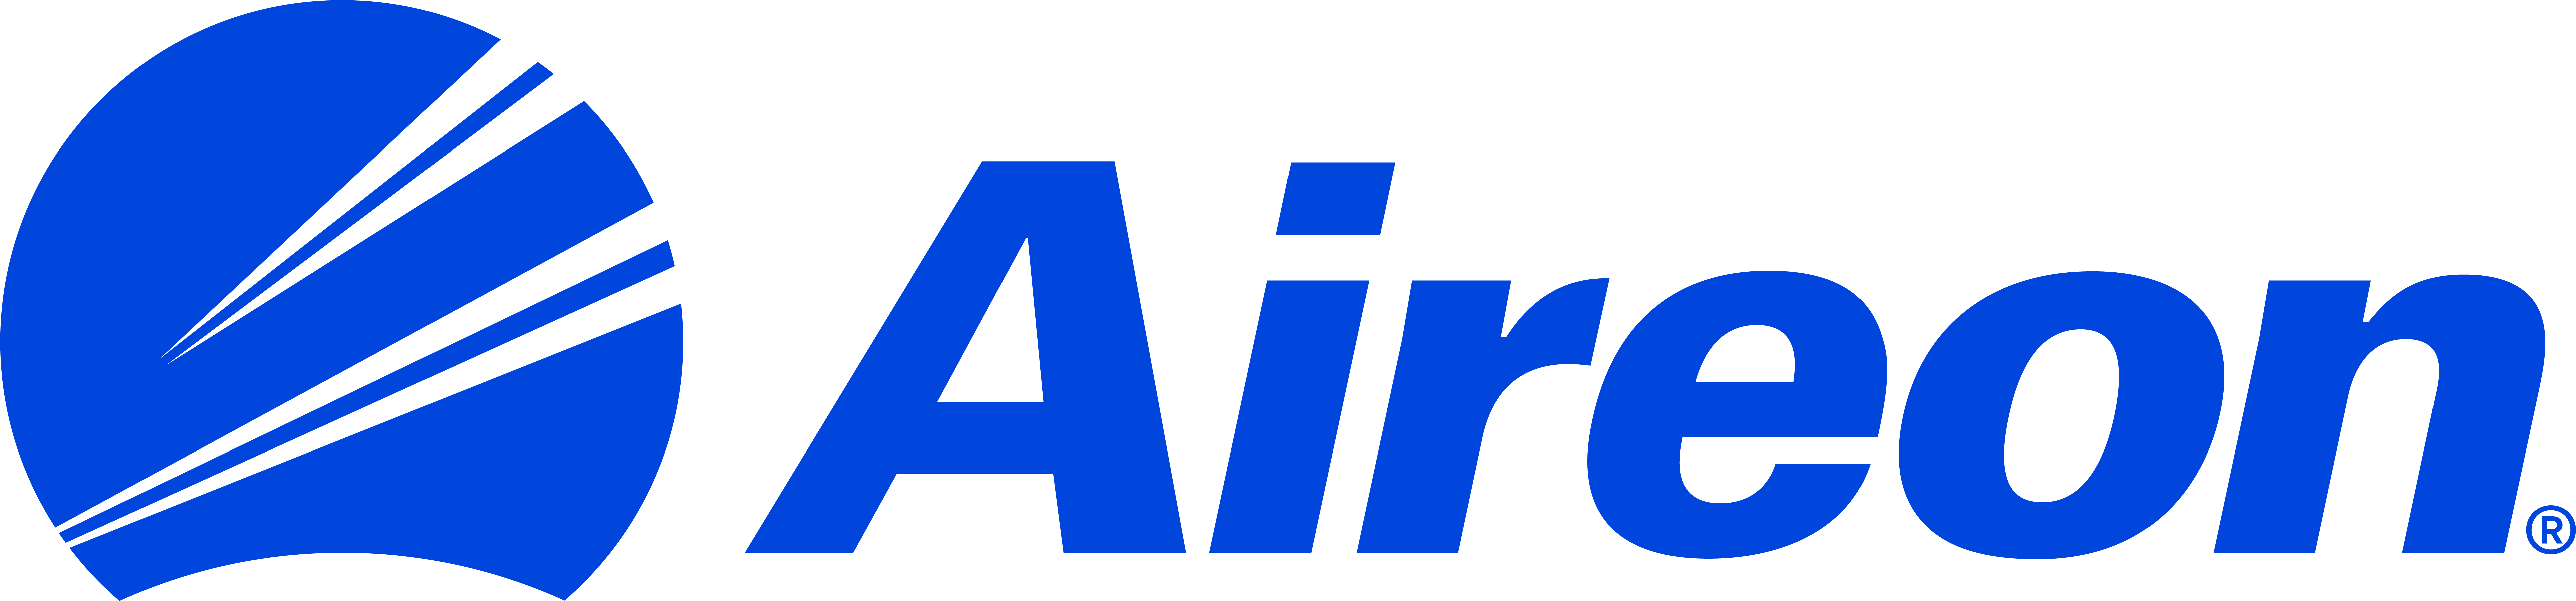 Aireon